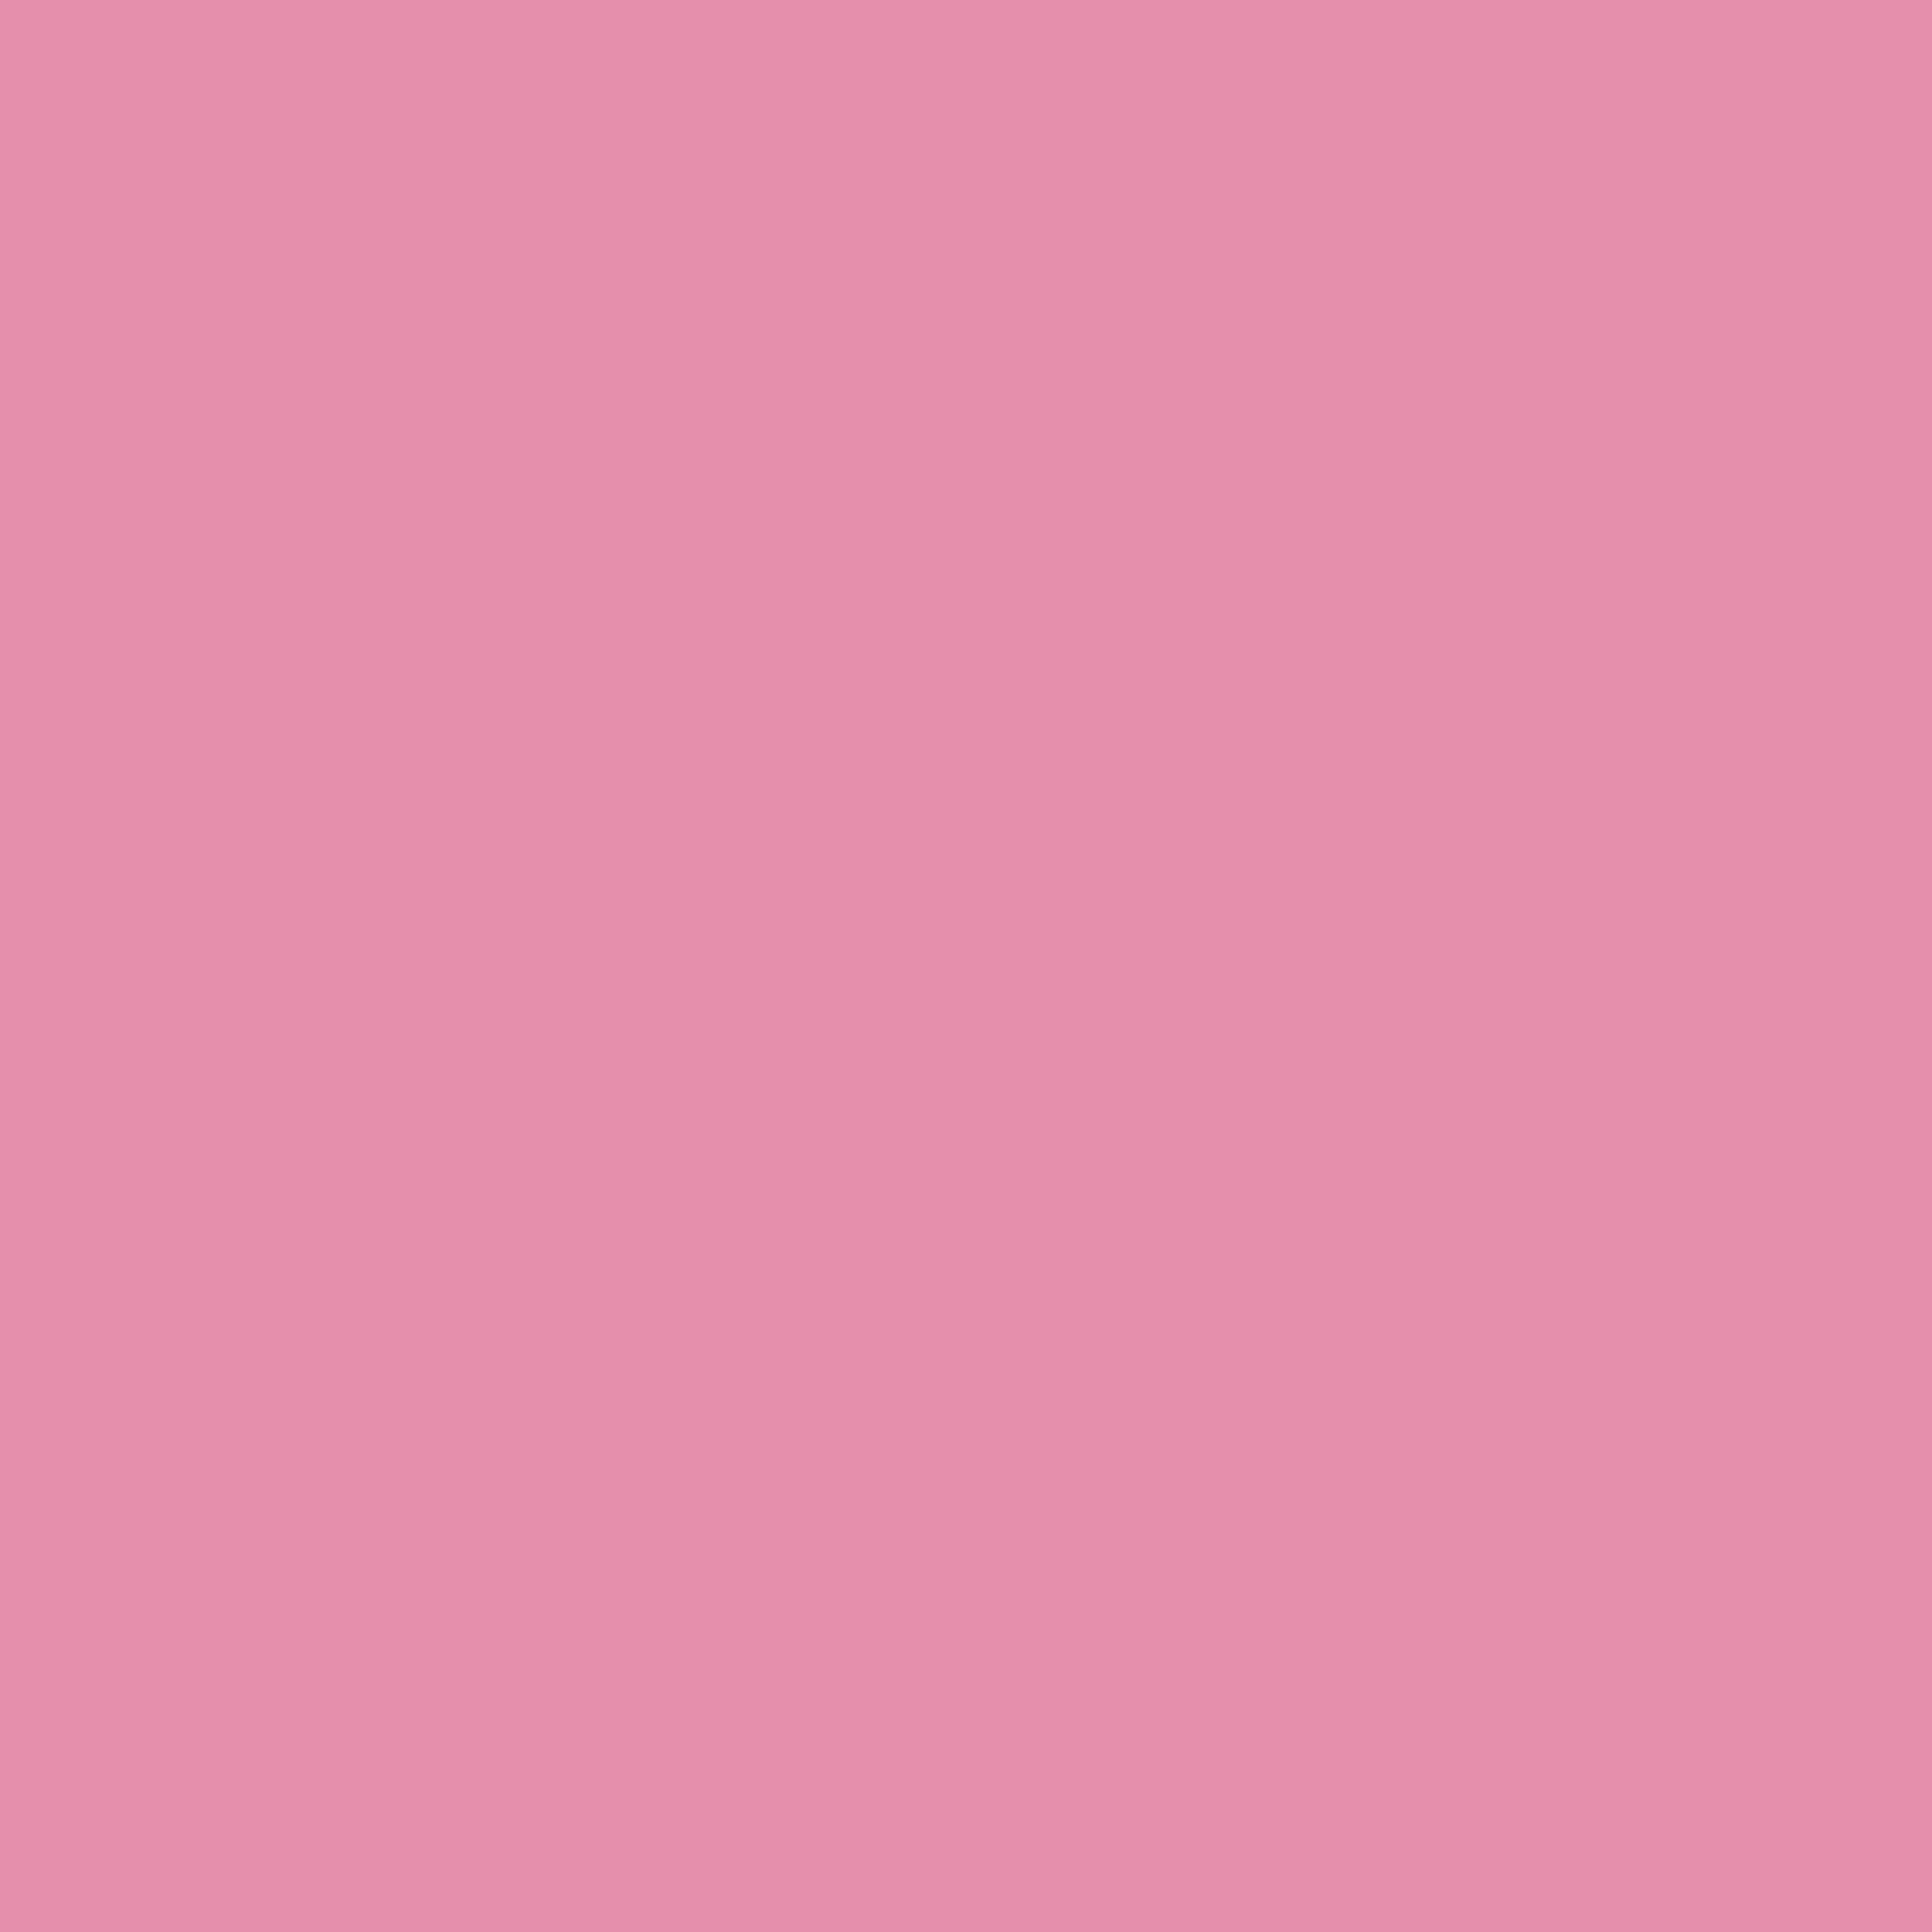 3600x3600 Charm Pink Solid Color Background